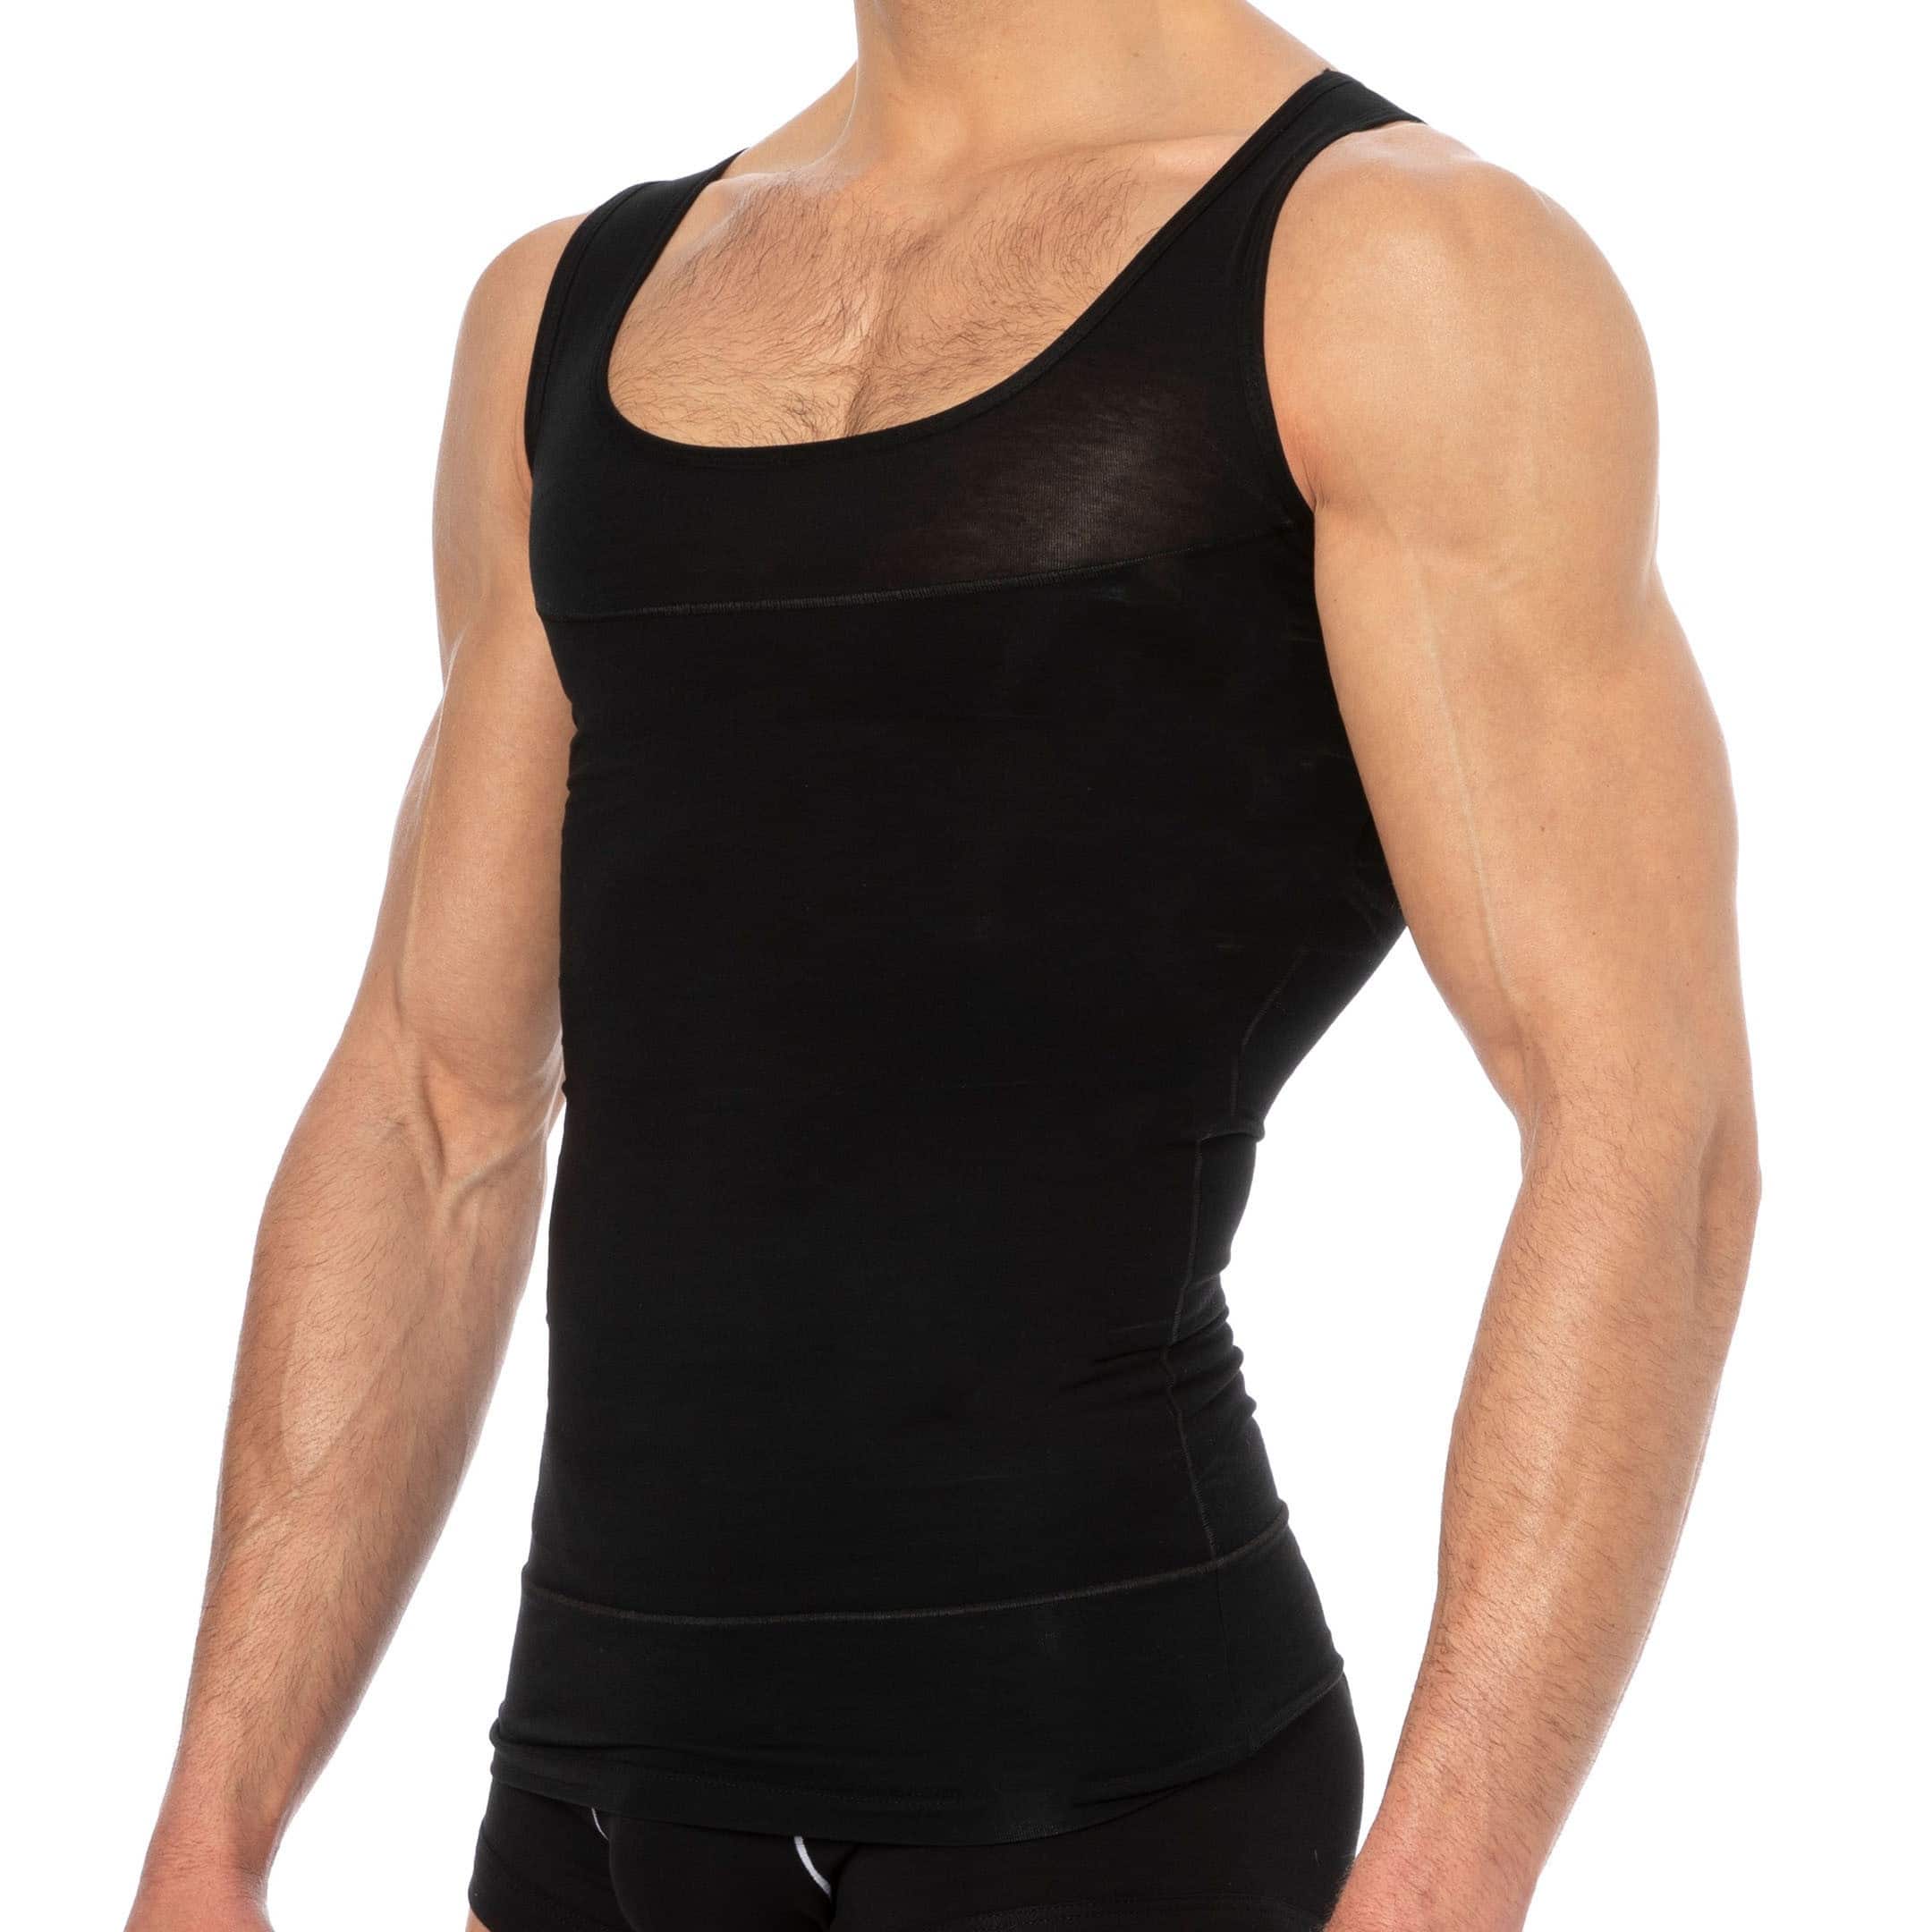 Doreanse Men's Body shapers and enhancing underwear